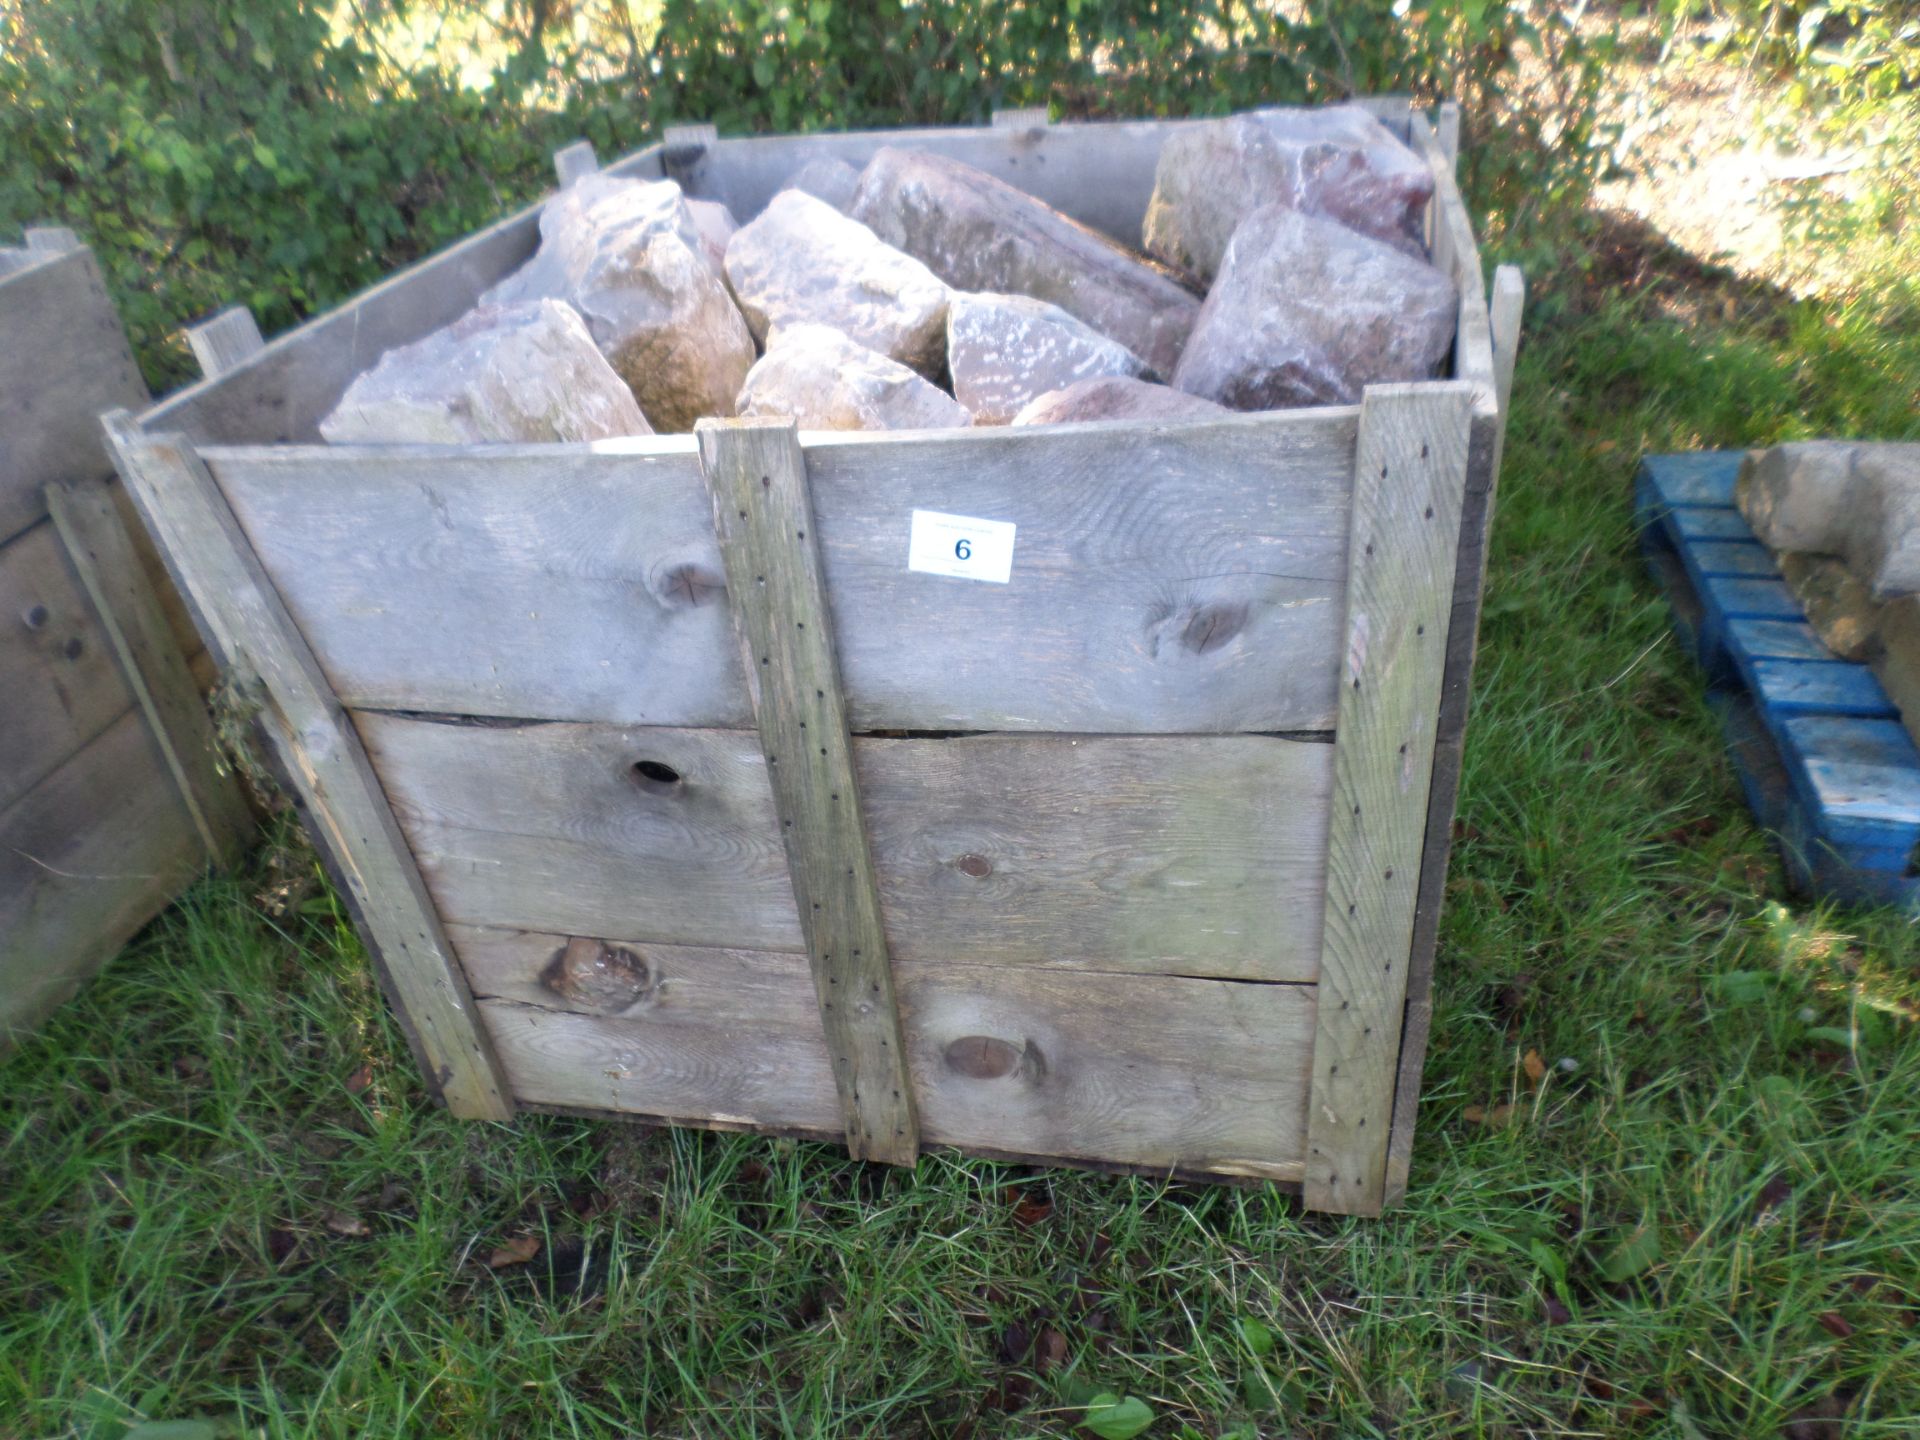 Pallet of building stone